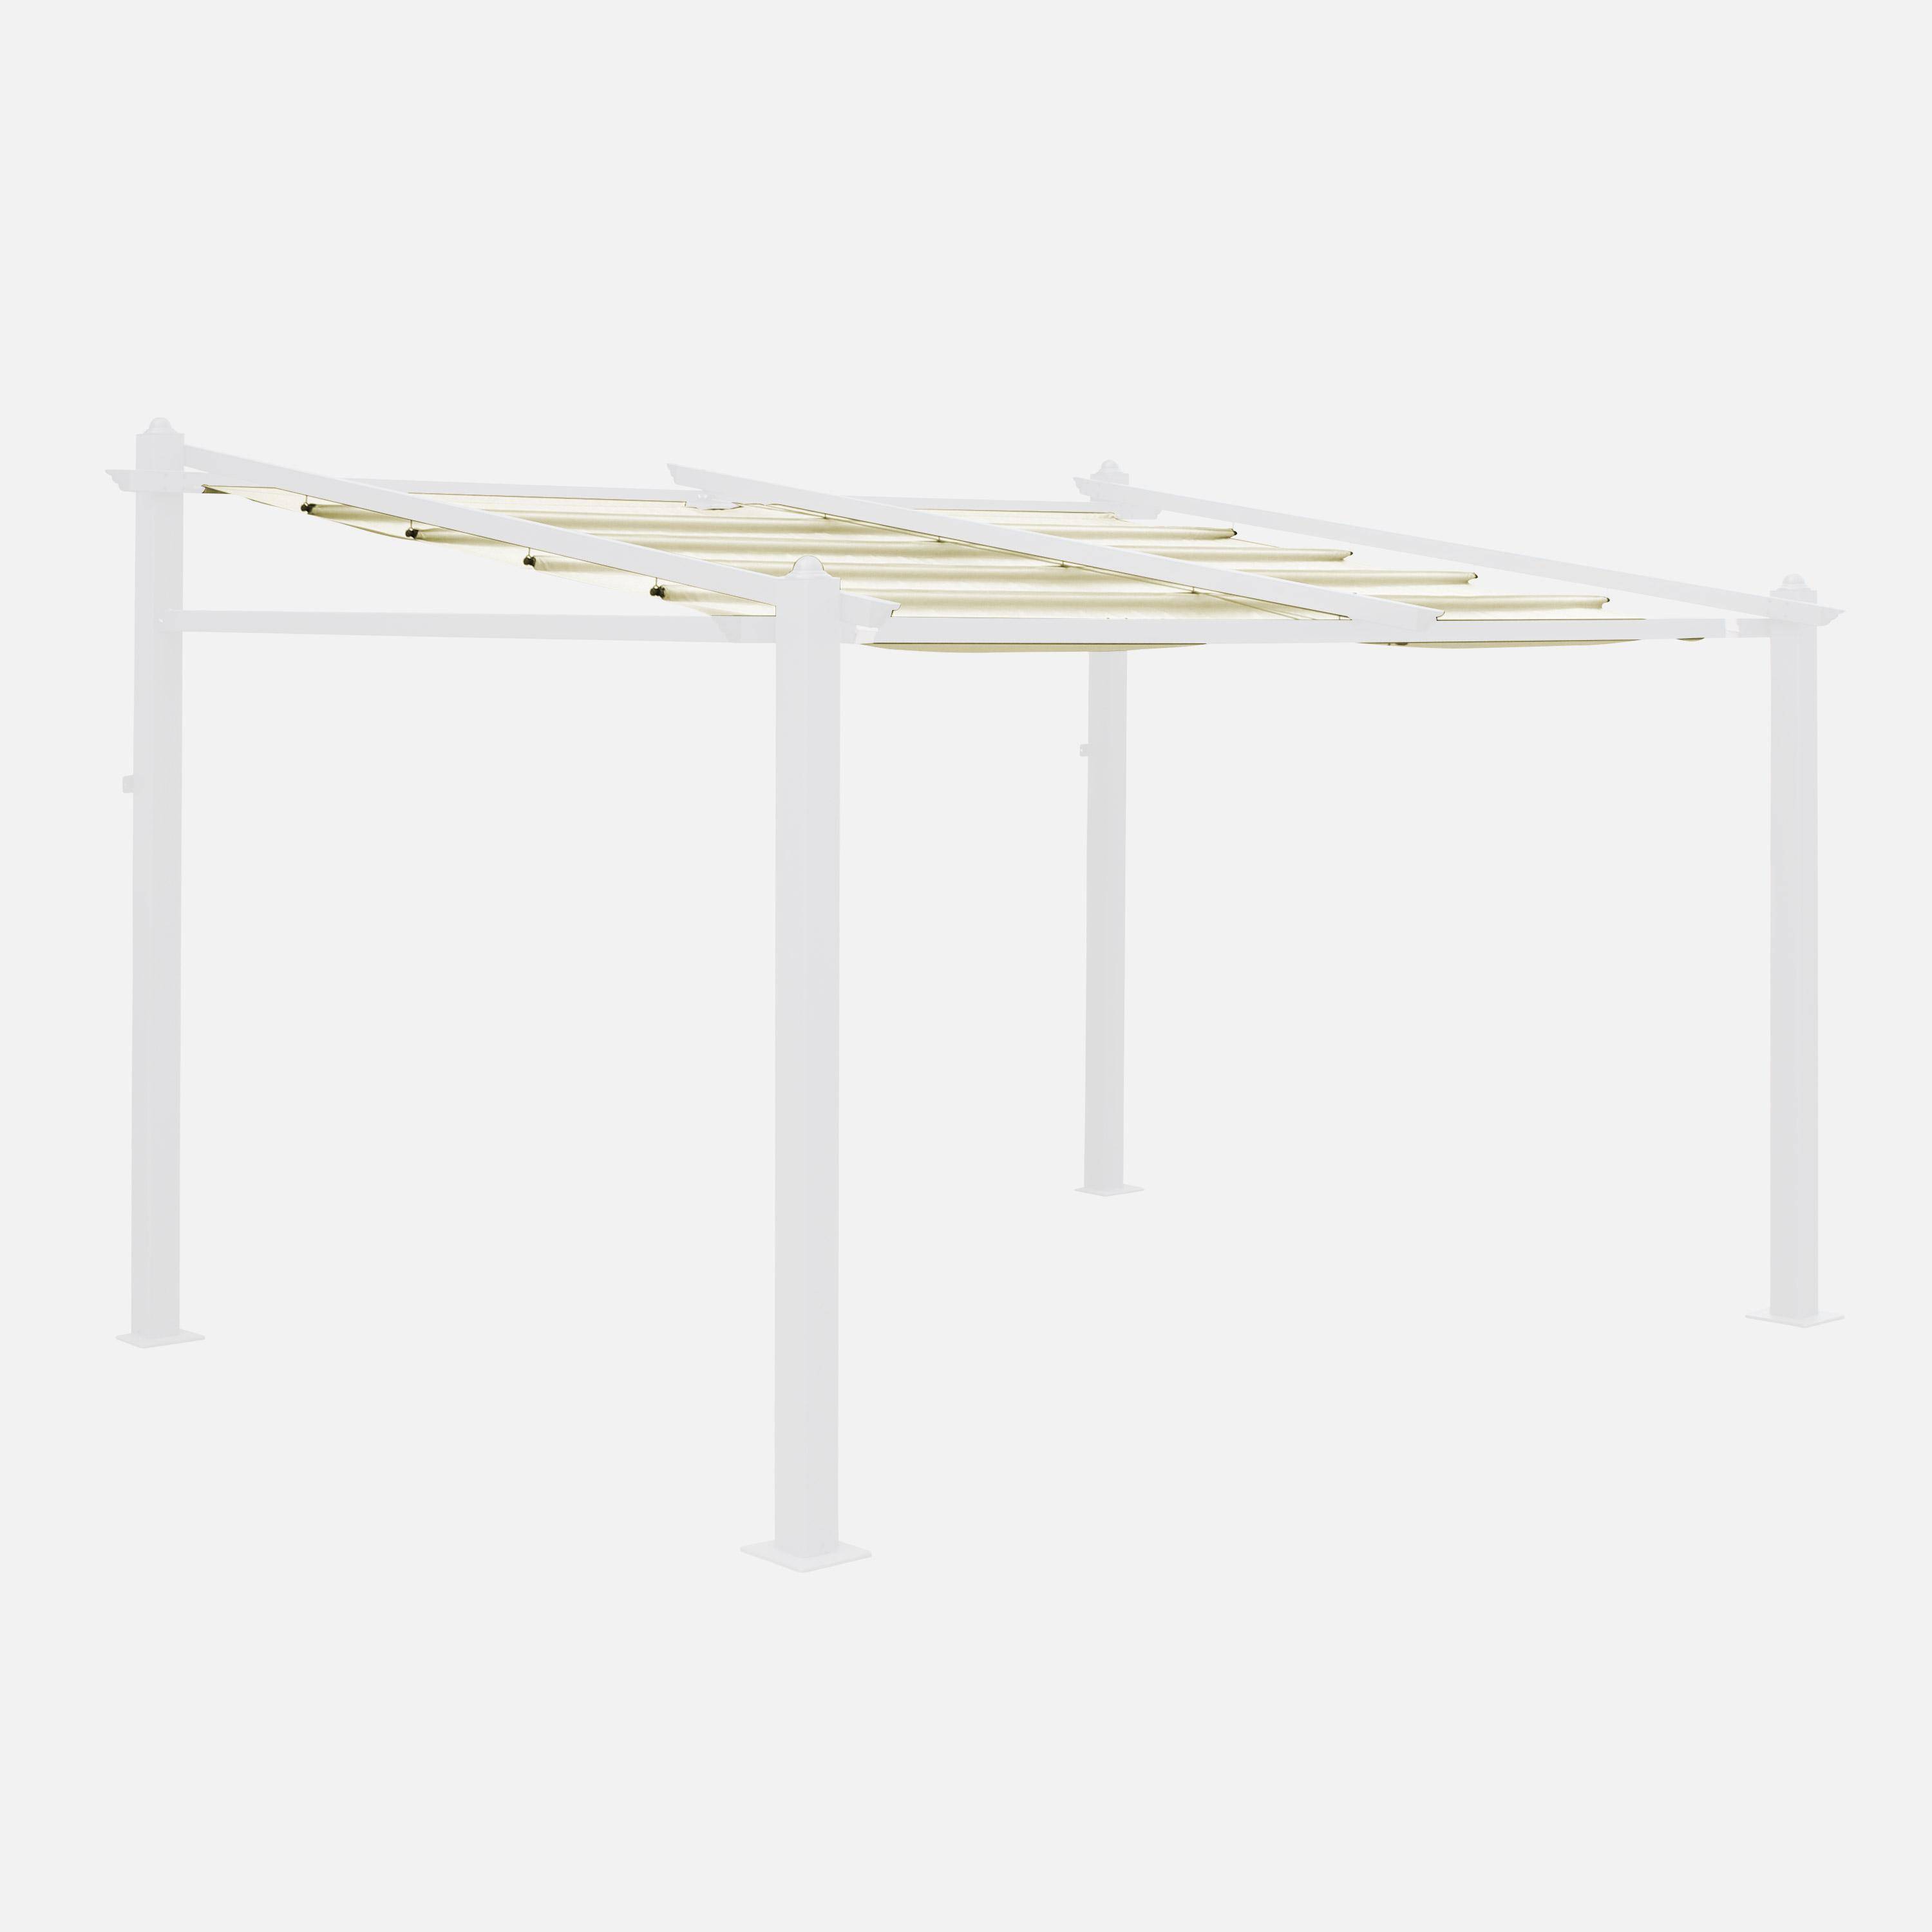 Canopy roof for 3x4m Morum gazebo - pergola replacement canopy - Off-White,sweeek,Photo1